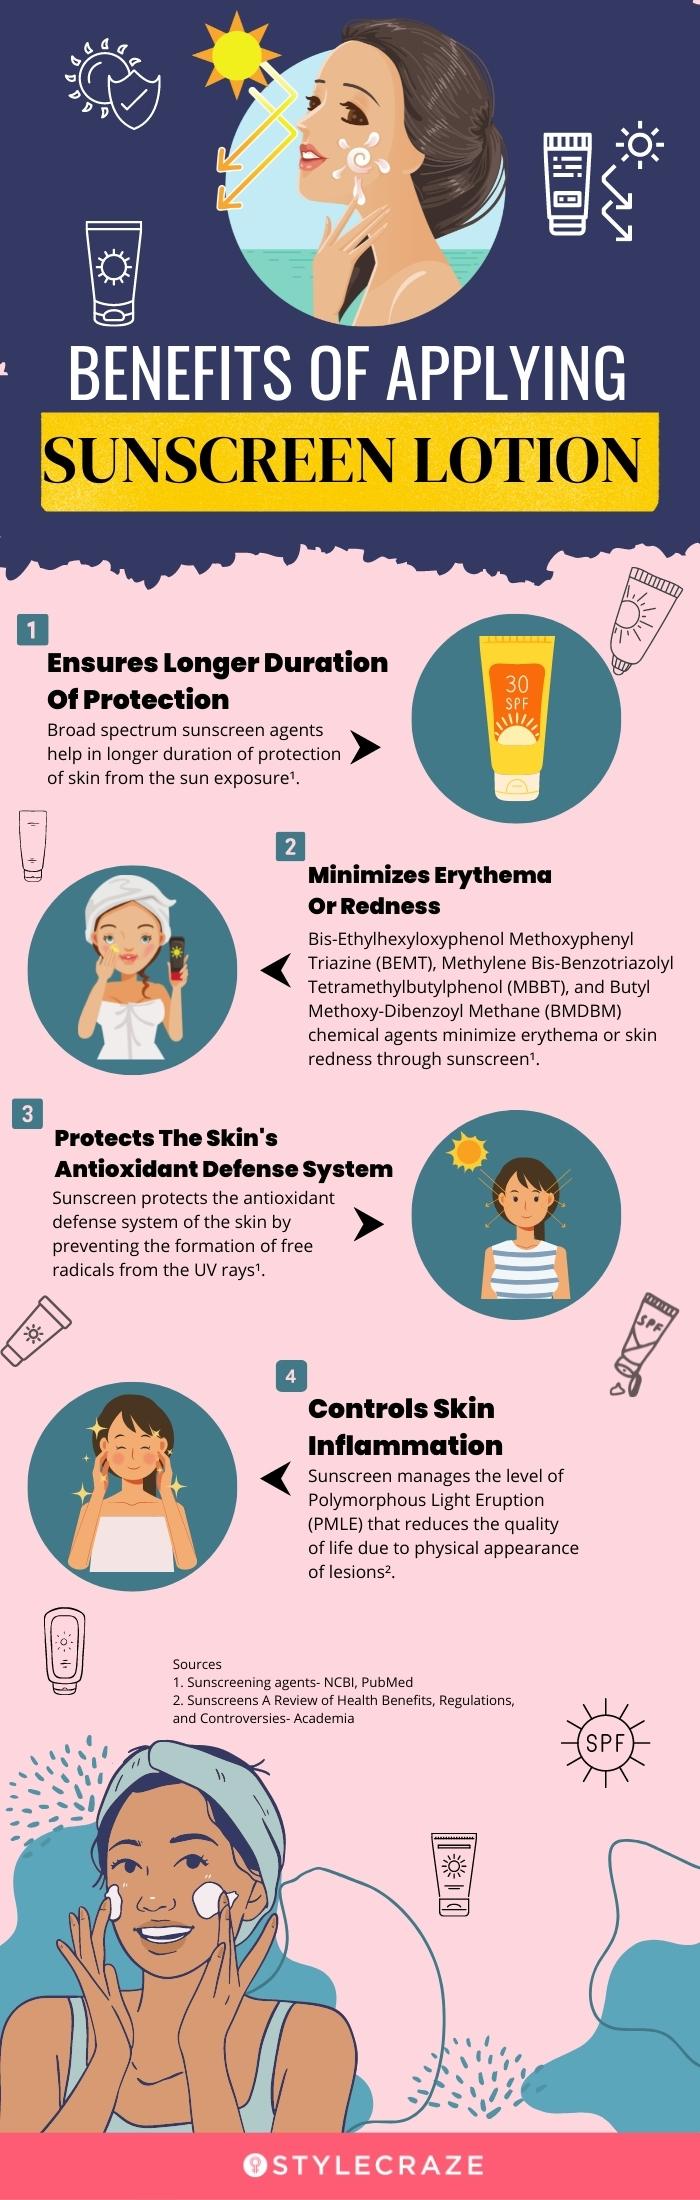 benefits of applying sunscreen lotion [infographic]